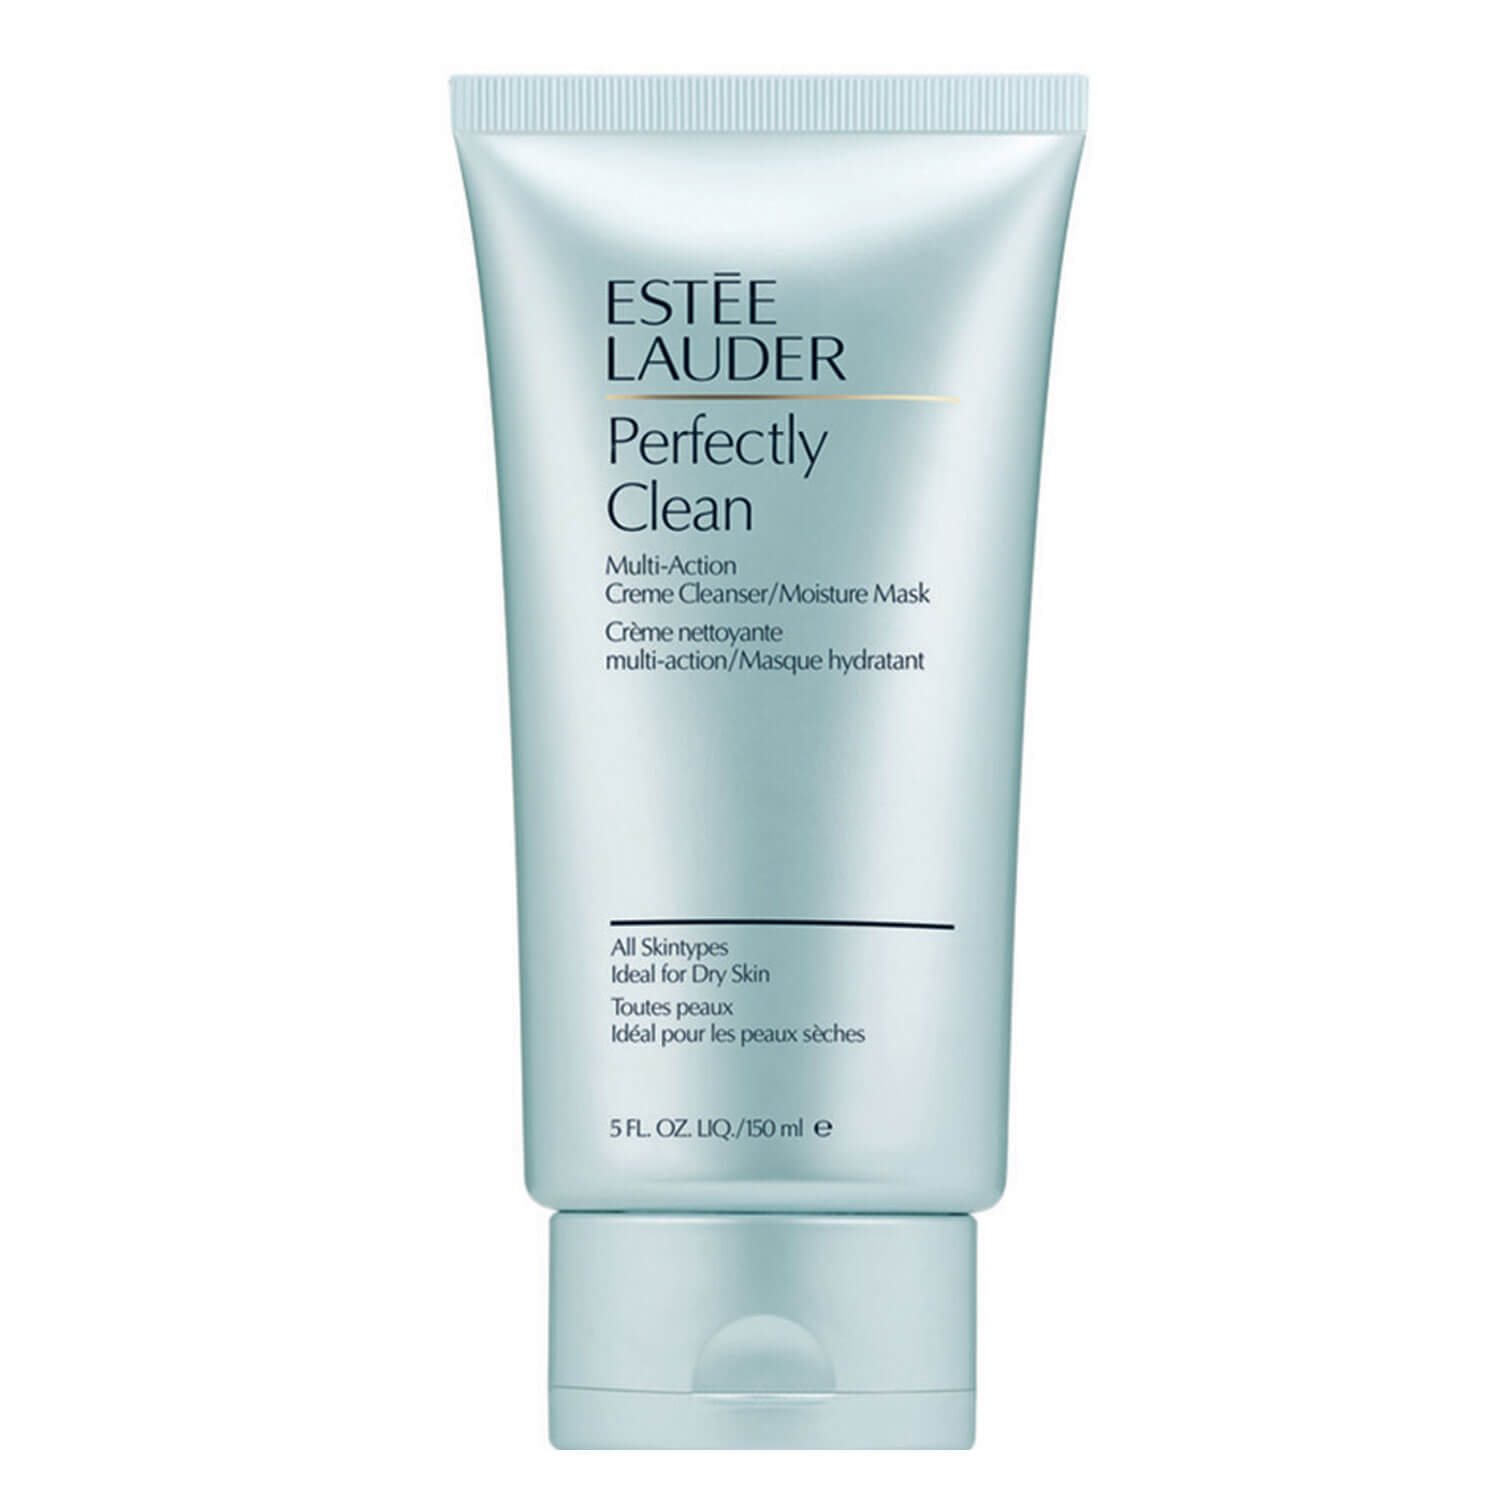 Product image from Perfectly Clean - Multi-Action Creme Cleanser/Moisture Mask